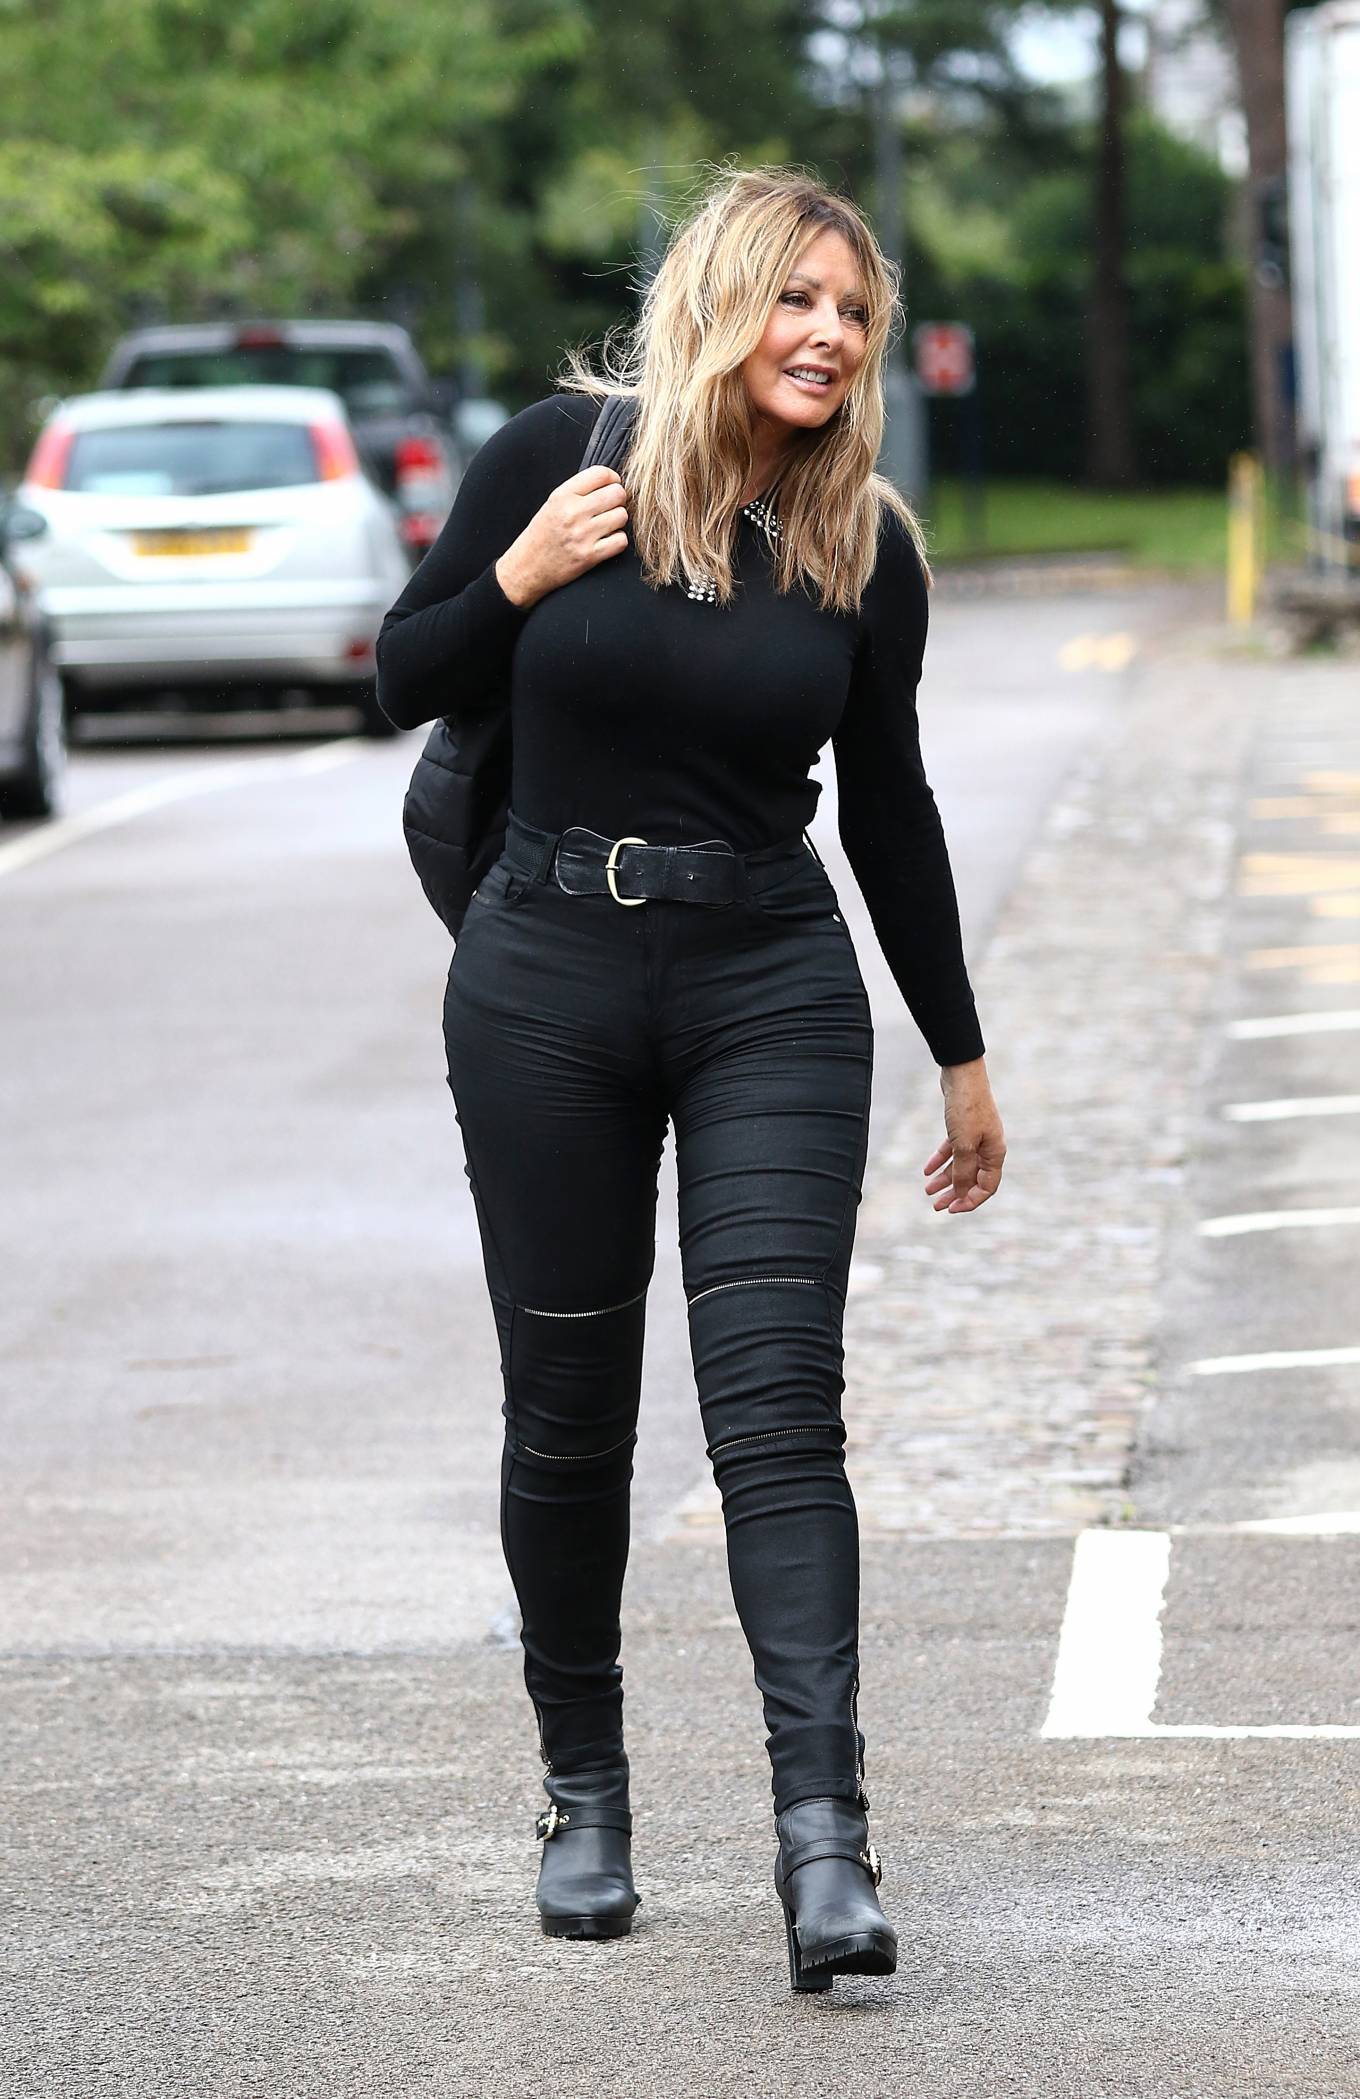 Carol Vorderman - Pictured at BBC Wales in Cardiff